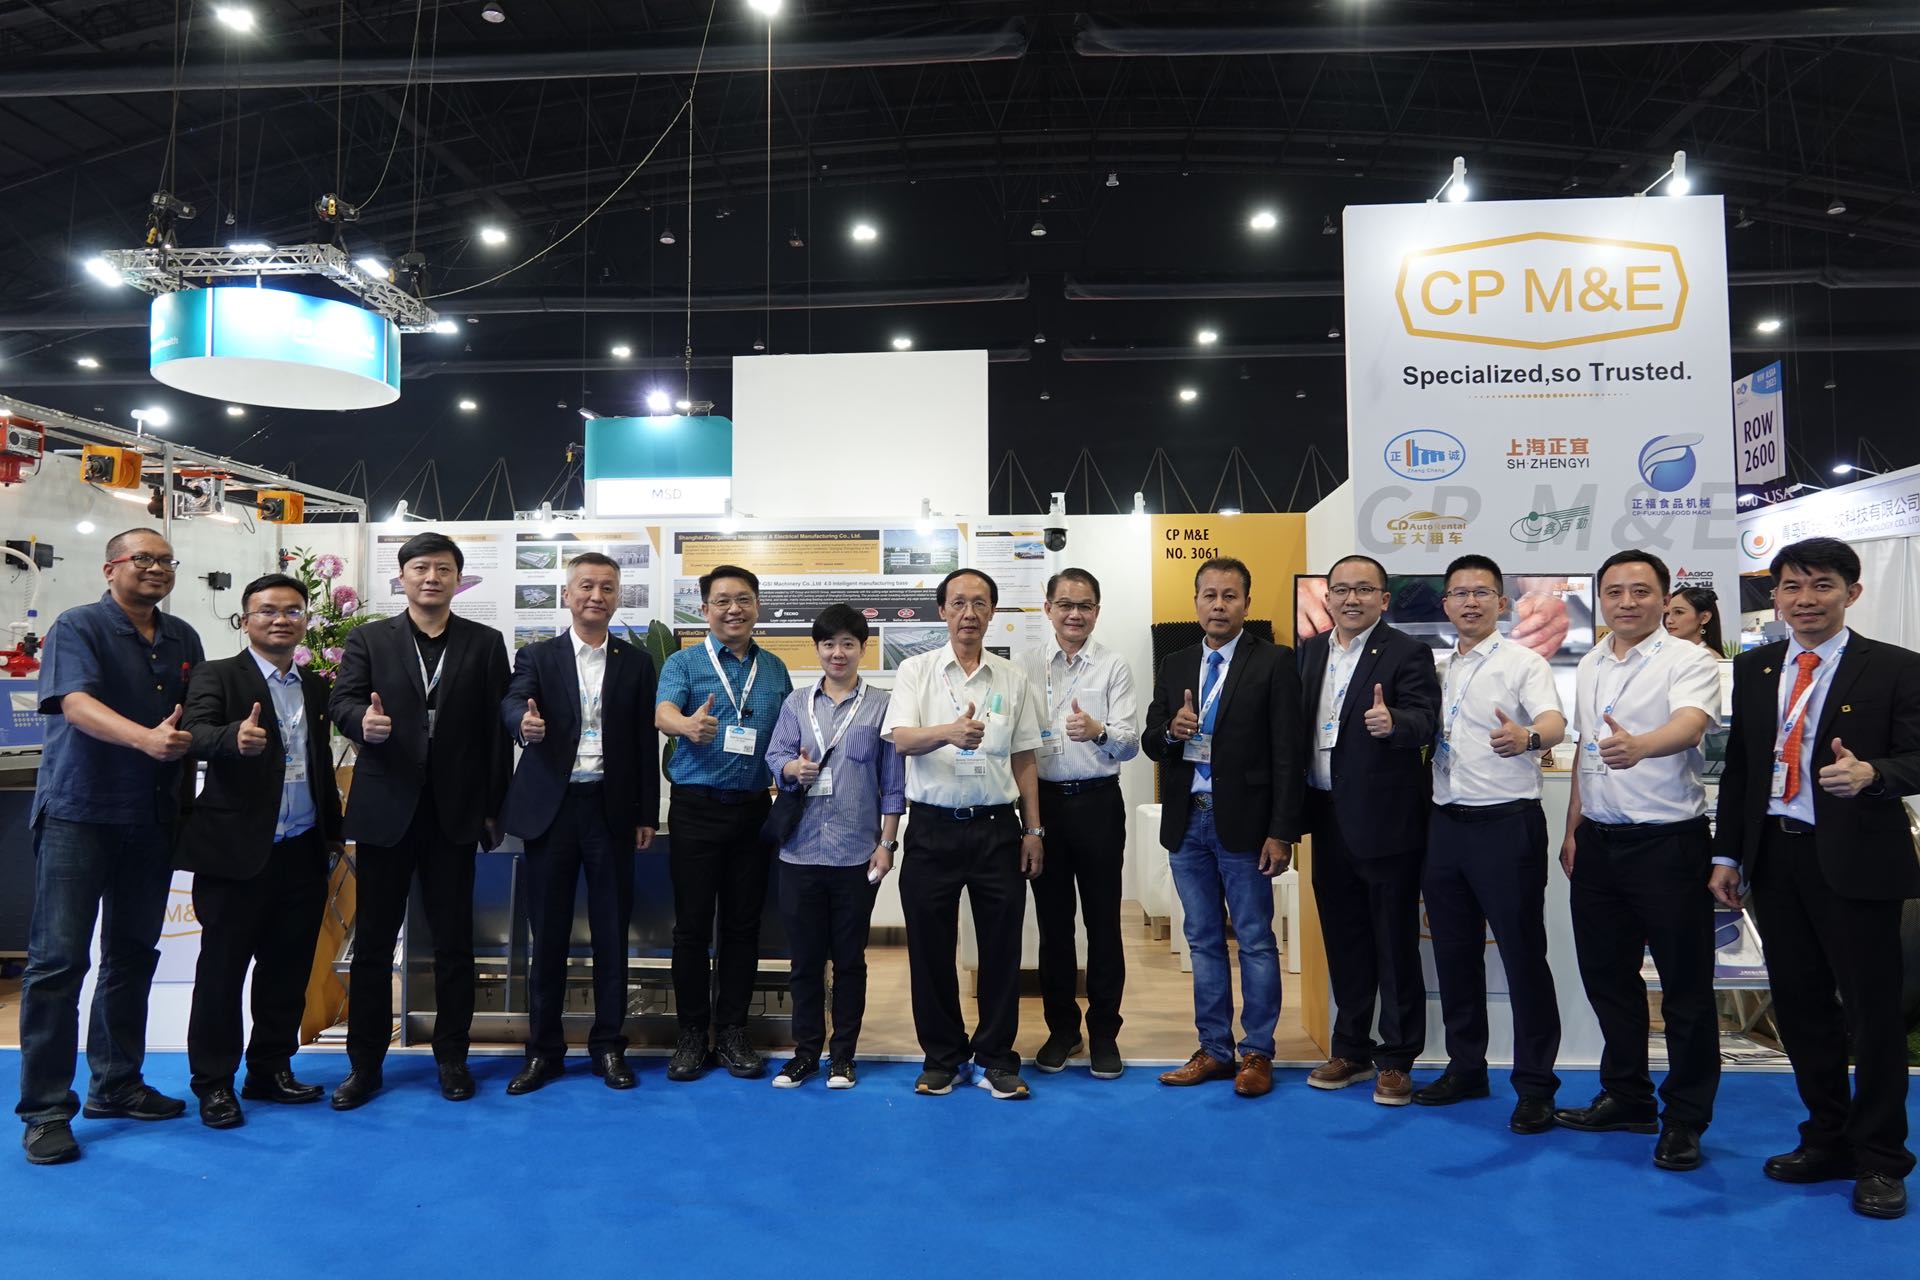 Thanks for visiting us at VIV ASIA 2023!